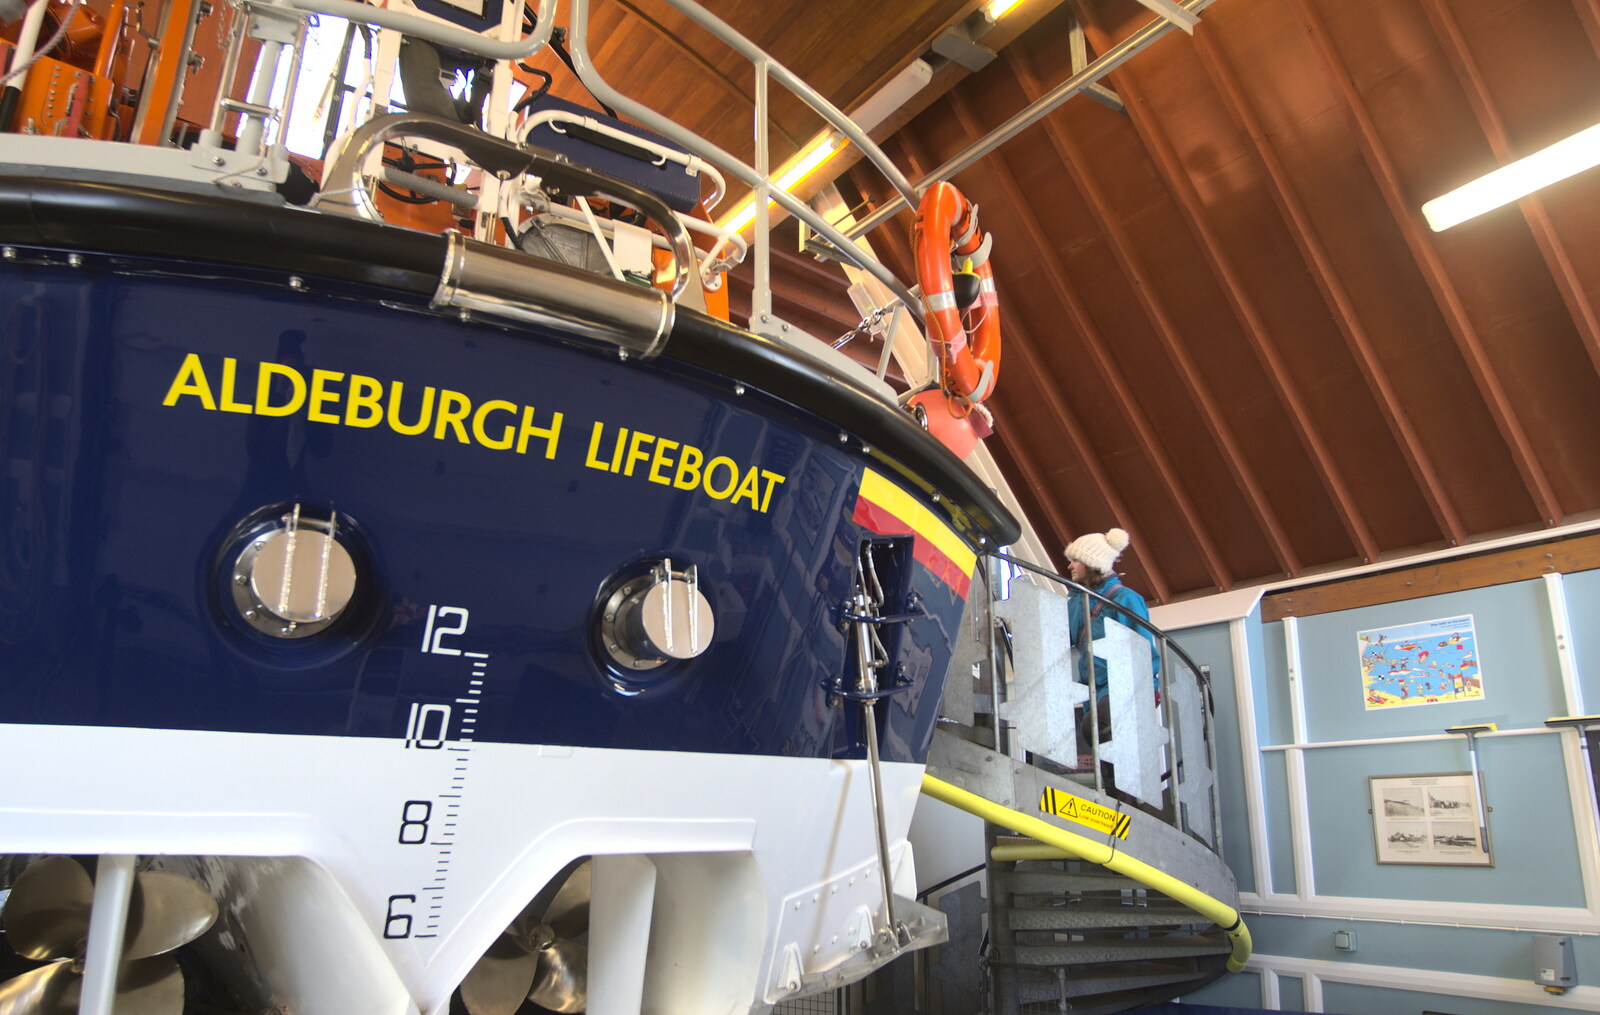 A Trip to Aldeburgh, Suffolk - 7th February 2016: The Aldeburgh lifeboat museum